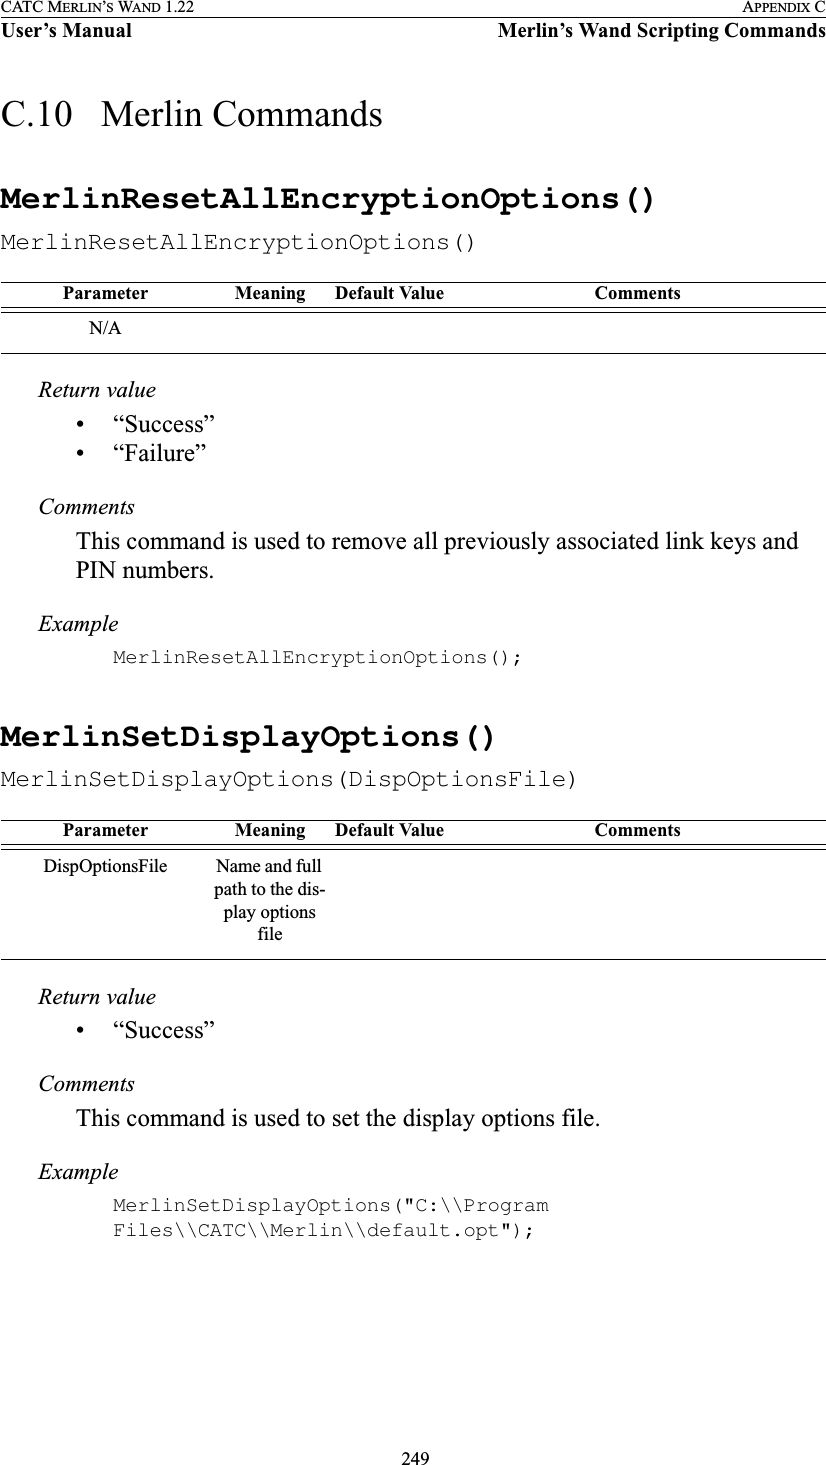  249CATC MERLIN’S WAND 1.22 APPENDIX CUser’s Manual Merlin’s Wand Scripting CommandsC.10   Merlin CommandsMerlinResetAllEncryptionOptions()MerlinResetAllEncryptionOptions()Return value• “Success”• “Failure”CommentsThis command is used to remove all previously associated link keys and PIN numbers.ExampleMerlinResetAllEncryptionOptions();MerlinSetDisplayOptions()MerlinSetDisplayOptions(DispOptionsFile)Return value• “Success”CommentsThis command is used to set the display options file.ExampleMerlinSetDisplayOptions(&quot;C:\\Program Files\\CATC\\Merlin\\default.opt&quot;);Parameter Meaning Default Value CommentsN/AParameter Meaning Default Value CommentsDispOptionsFile Name and full path to the dis-play options file